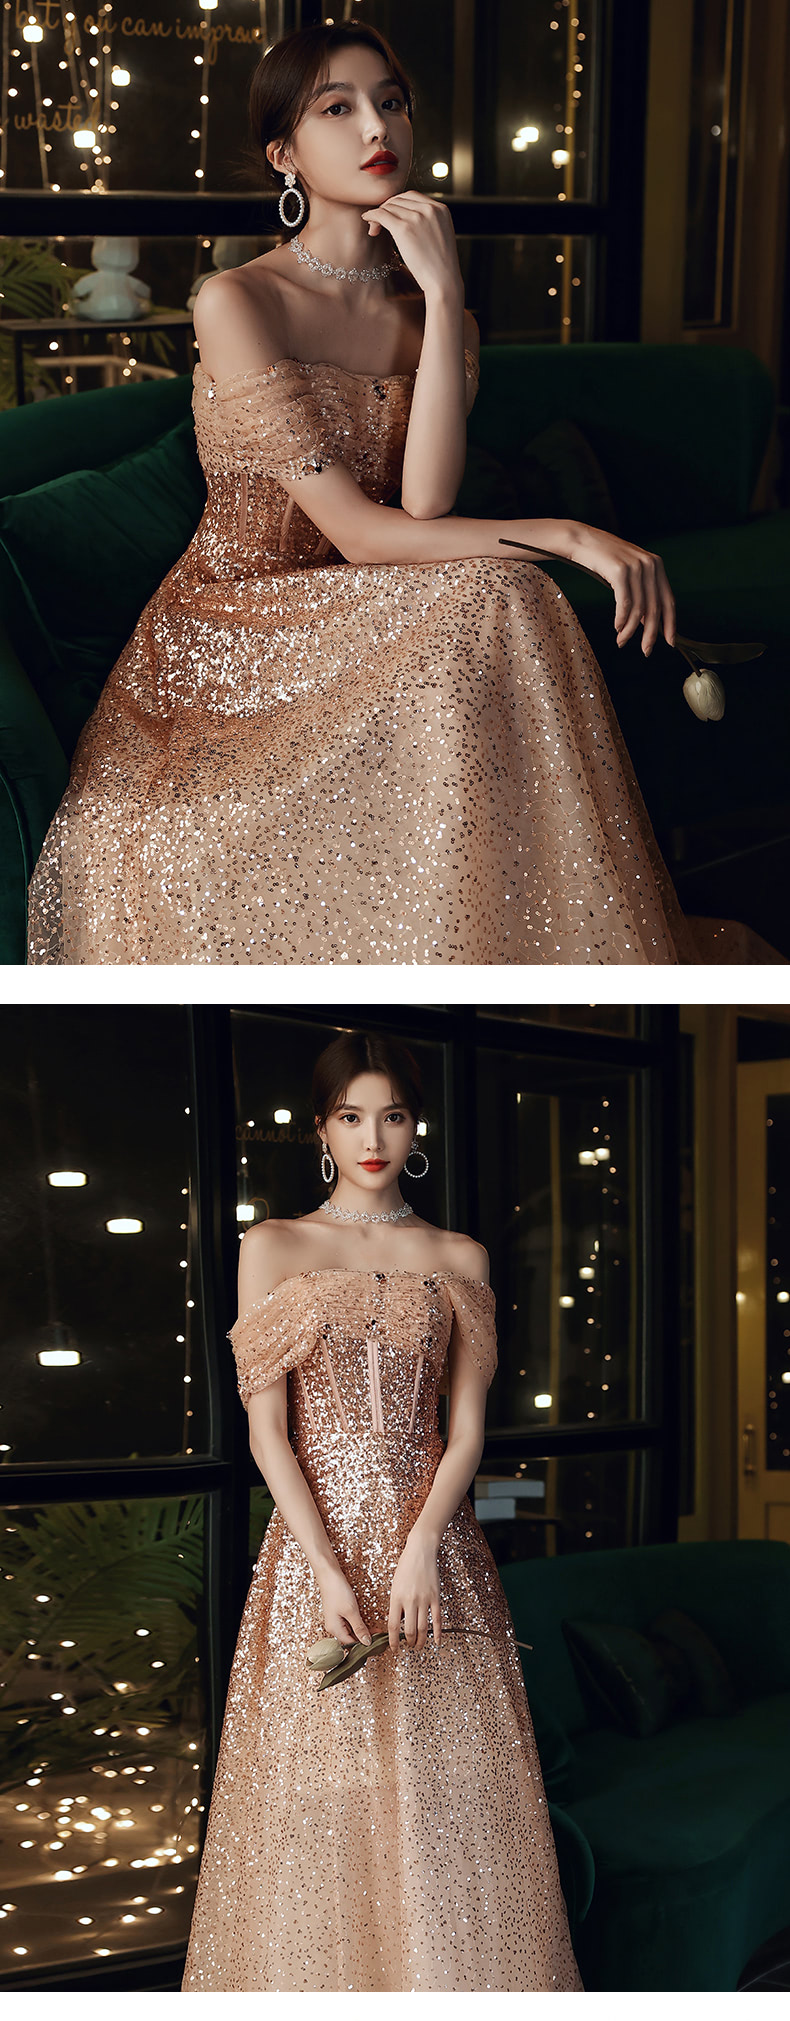 Fashion-Champagne-Tube-Evening-Dress-Formal-Prom-Long-Gown09.jpg